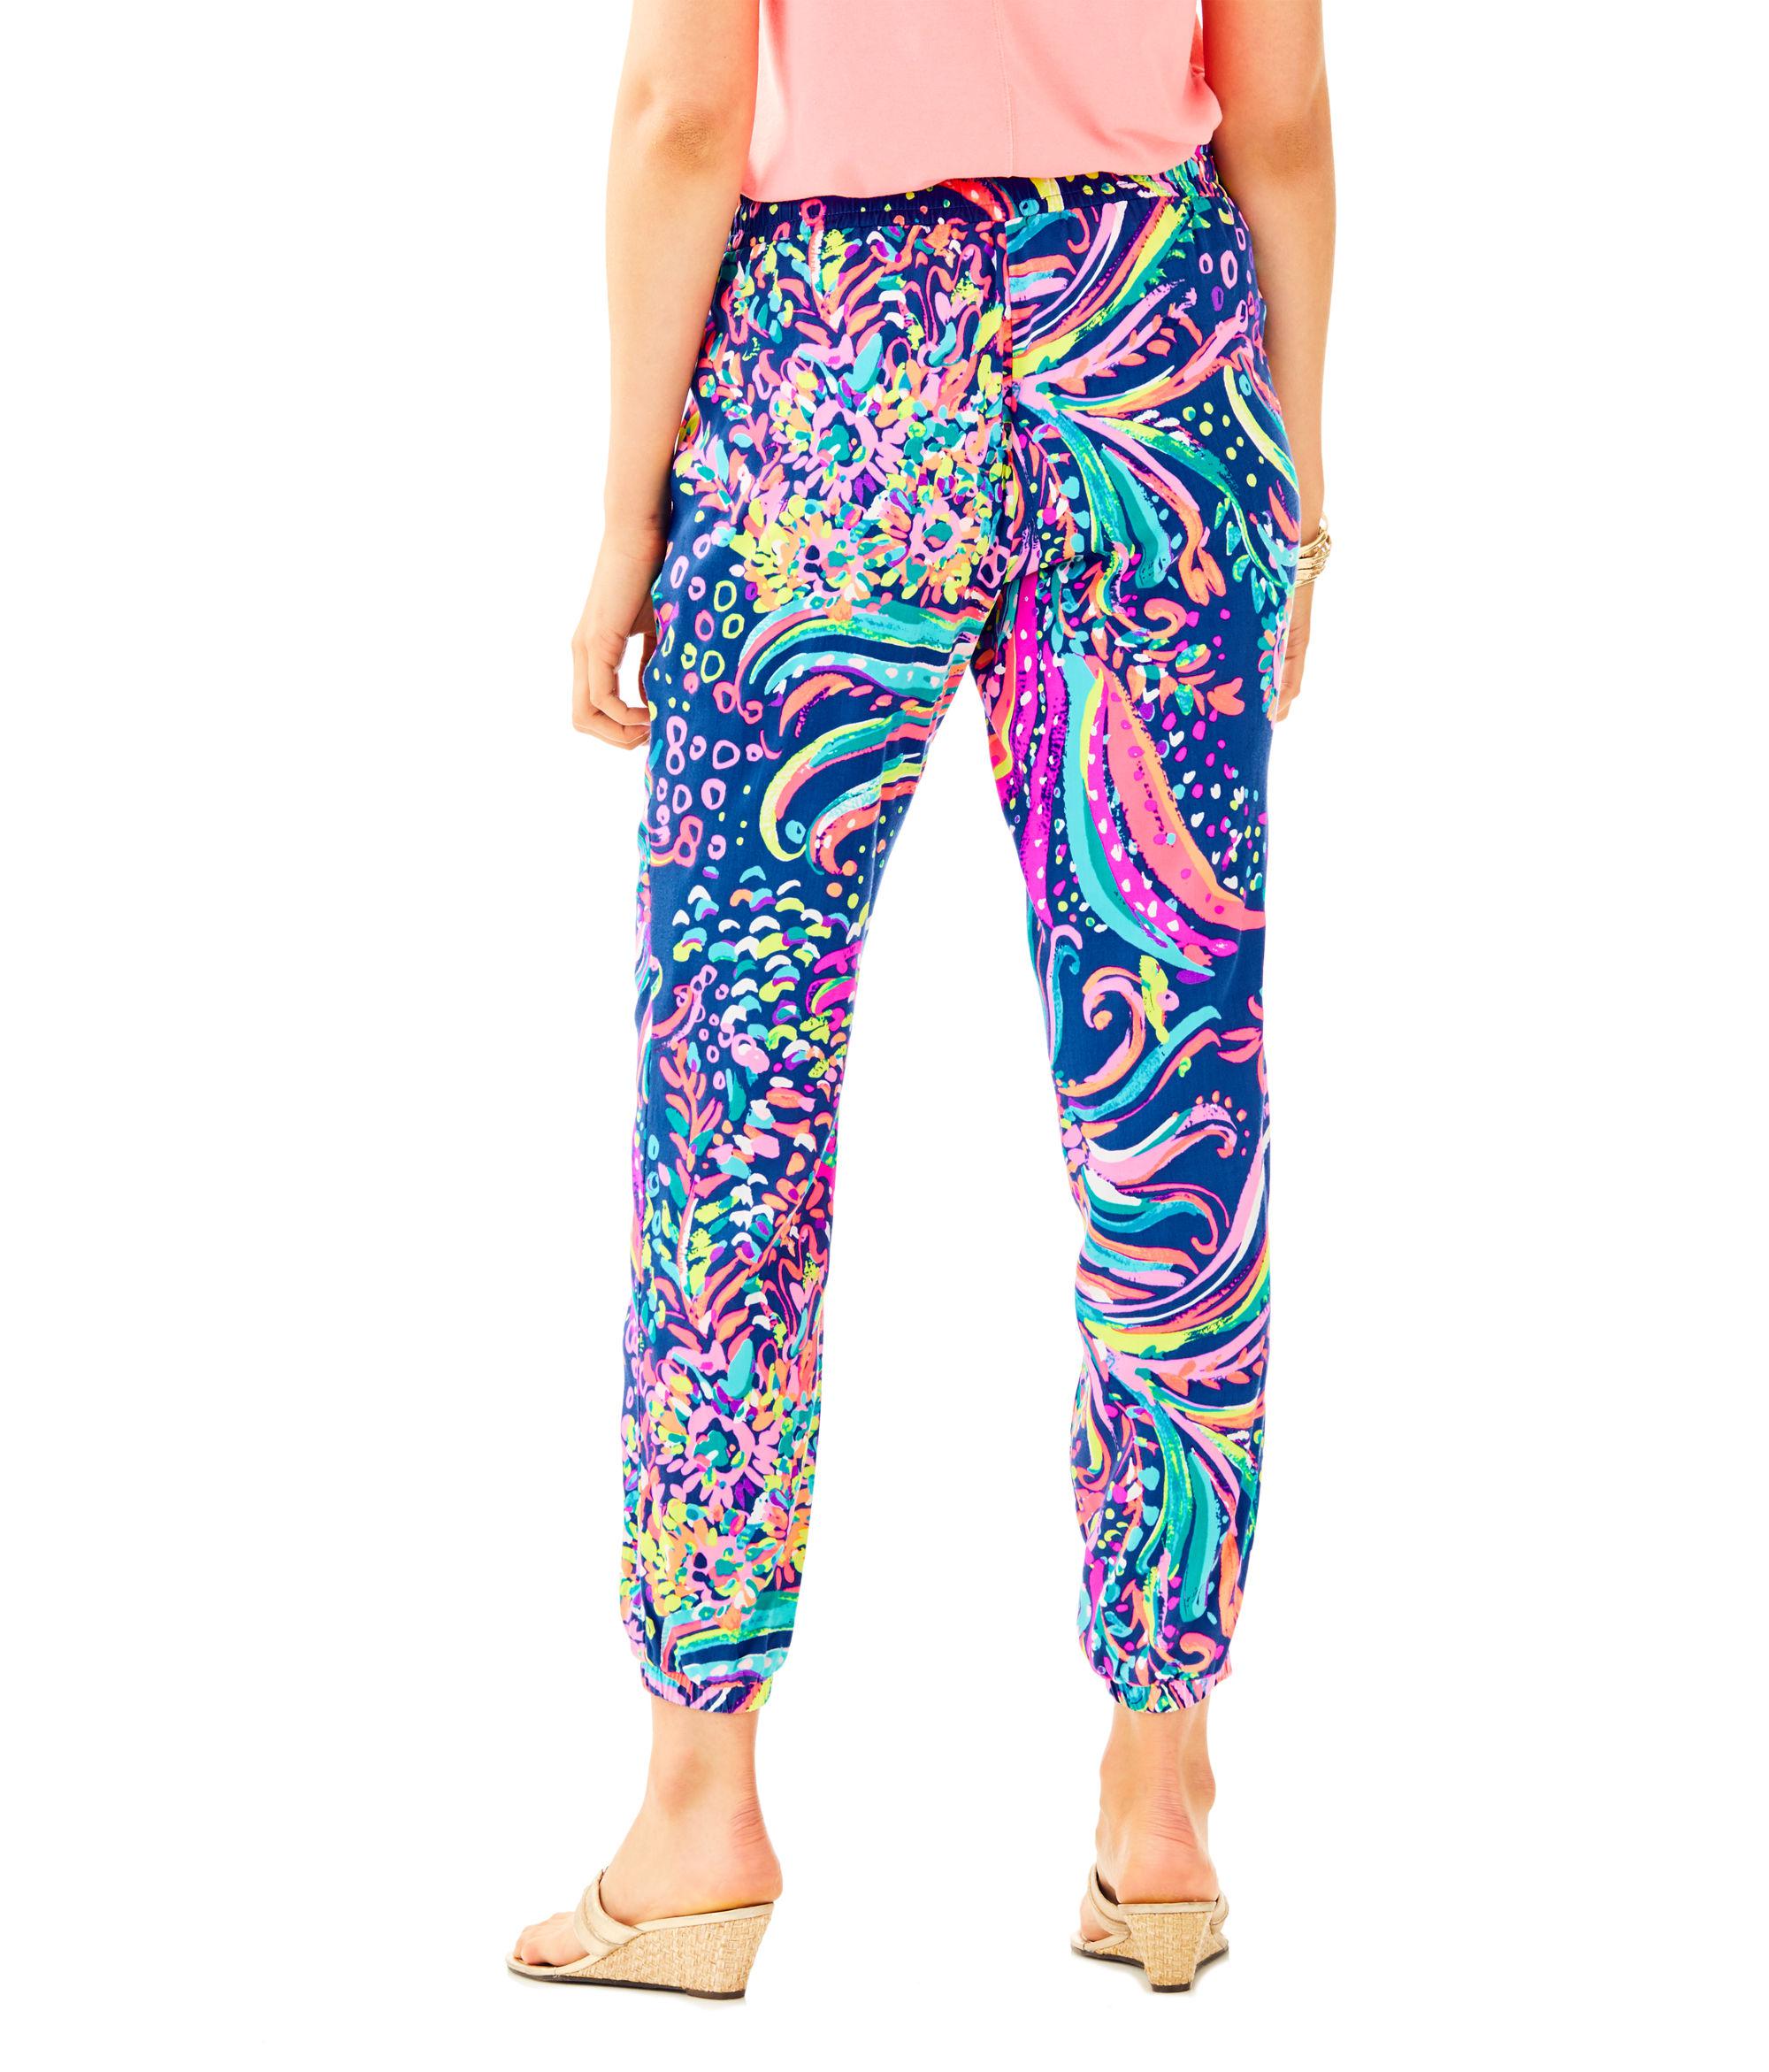 Lyst - Lilly Pulitzer 29